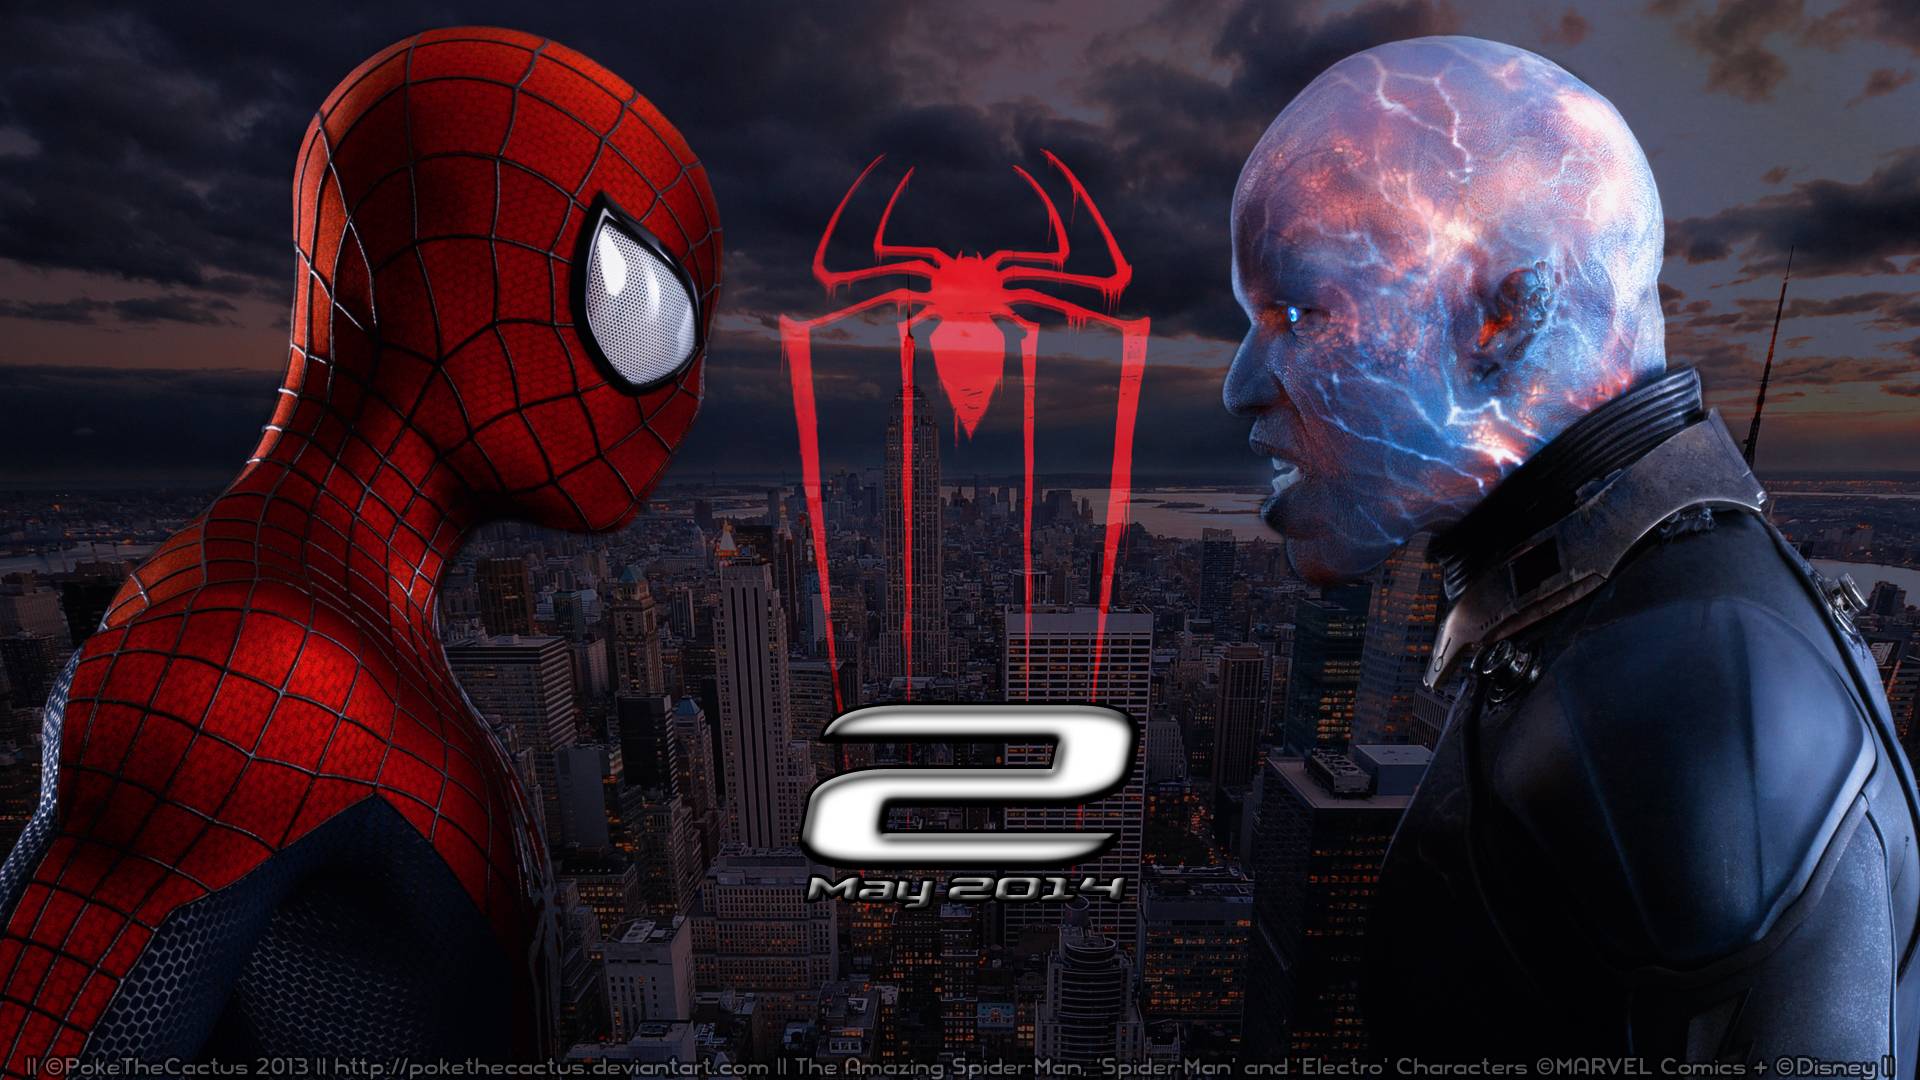 Free download Spider Man 2 Wallpaper for The Amazing Spider Man 2 [1920x1080] for your Desktop, Mobile & Tablet. Explore Image 2 Wallpaper. Free Desktop Wallpaper, Home Screen Wallpaper, Use Picture As Wallpaper